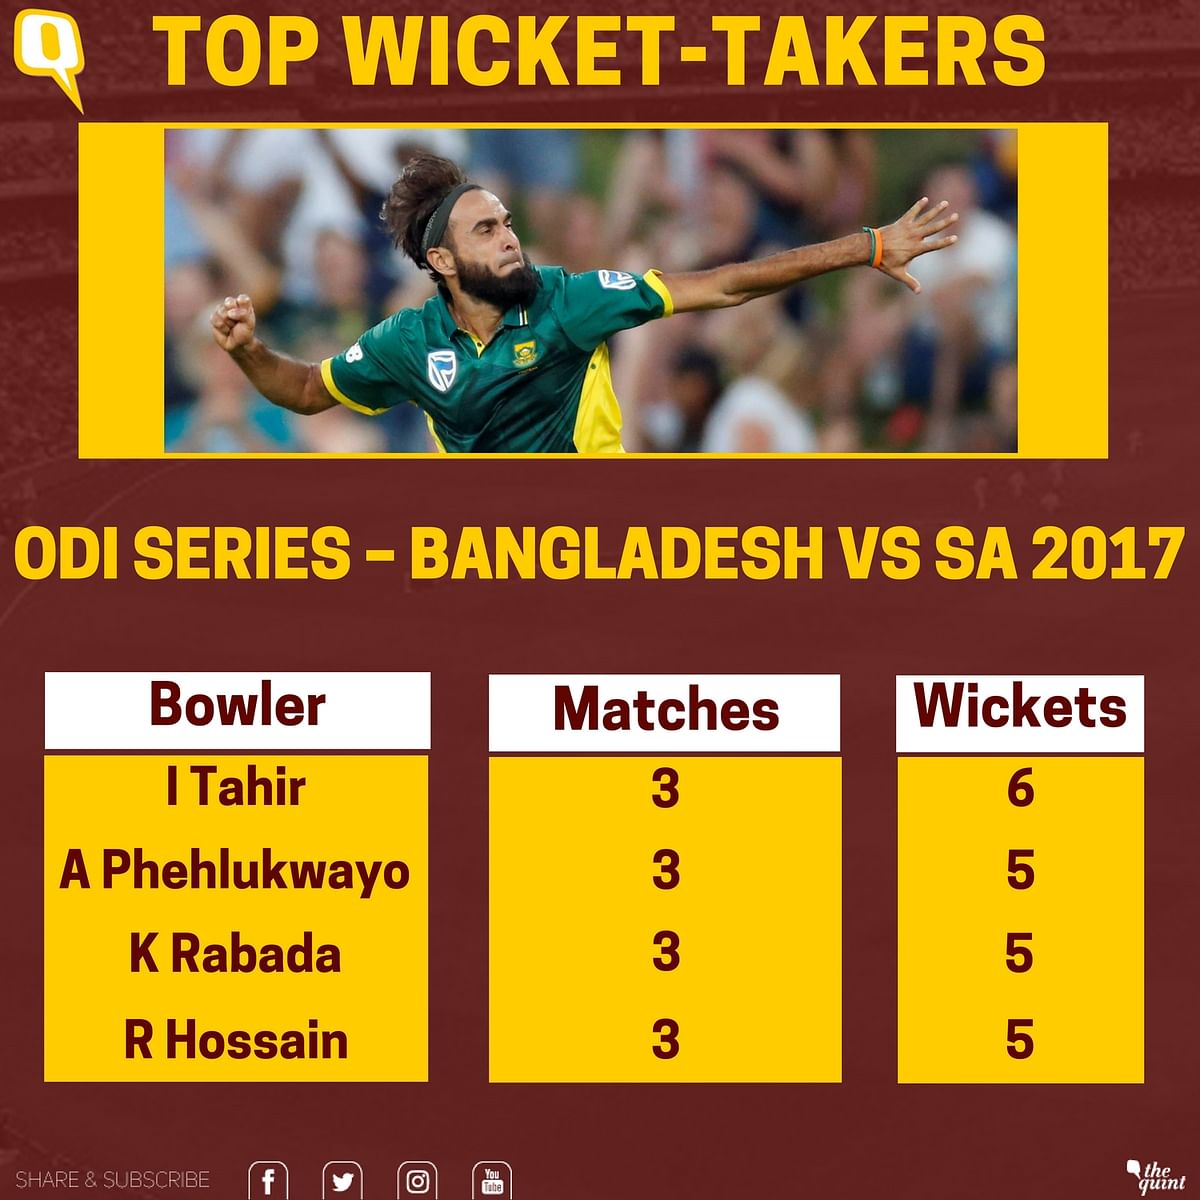 Here’s a look at how the spinners have made more and more impact as ODI series have been played in South Africa.